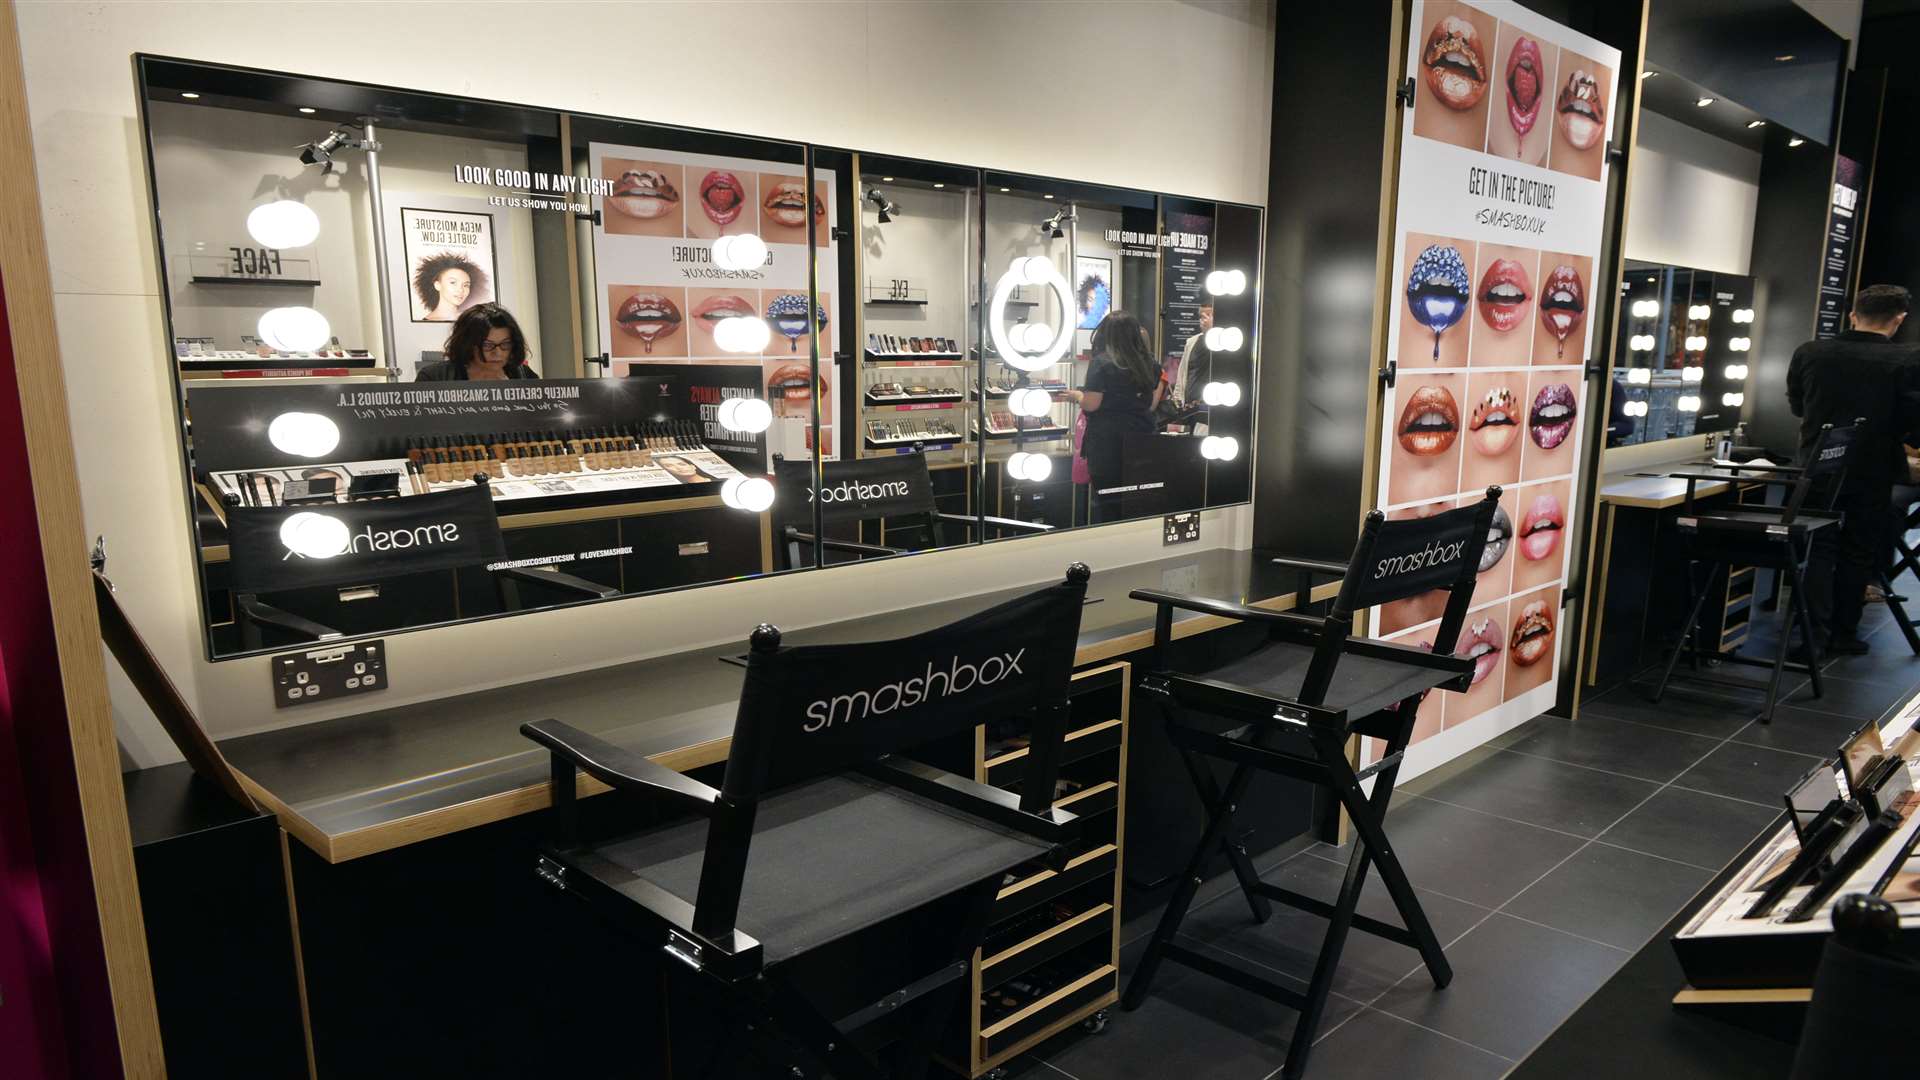 Smashbox Cosmetics has opened its debut stand-alone store in the South East at Bluewater